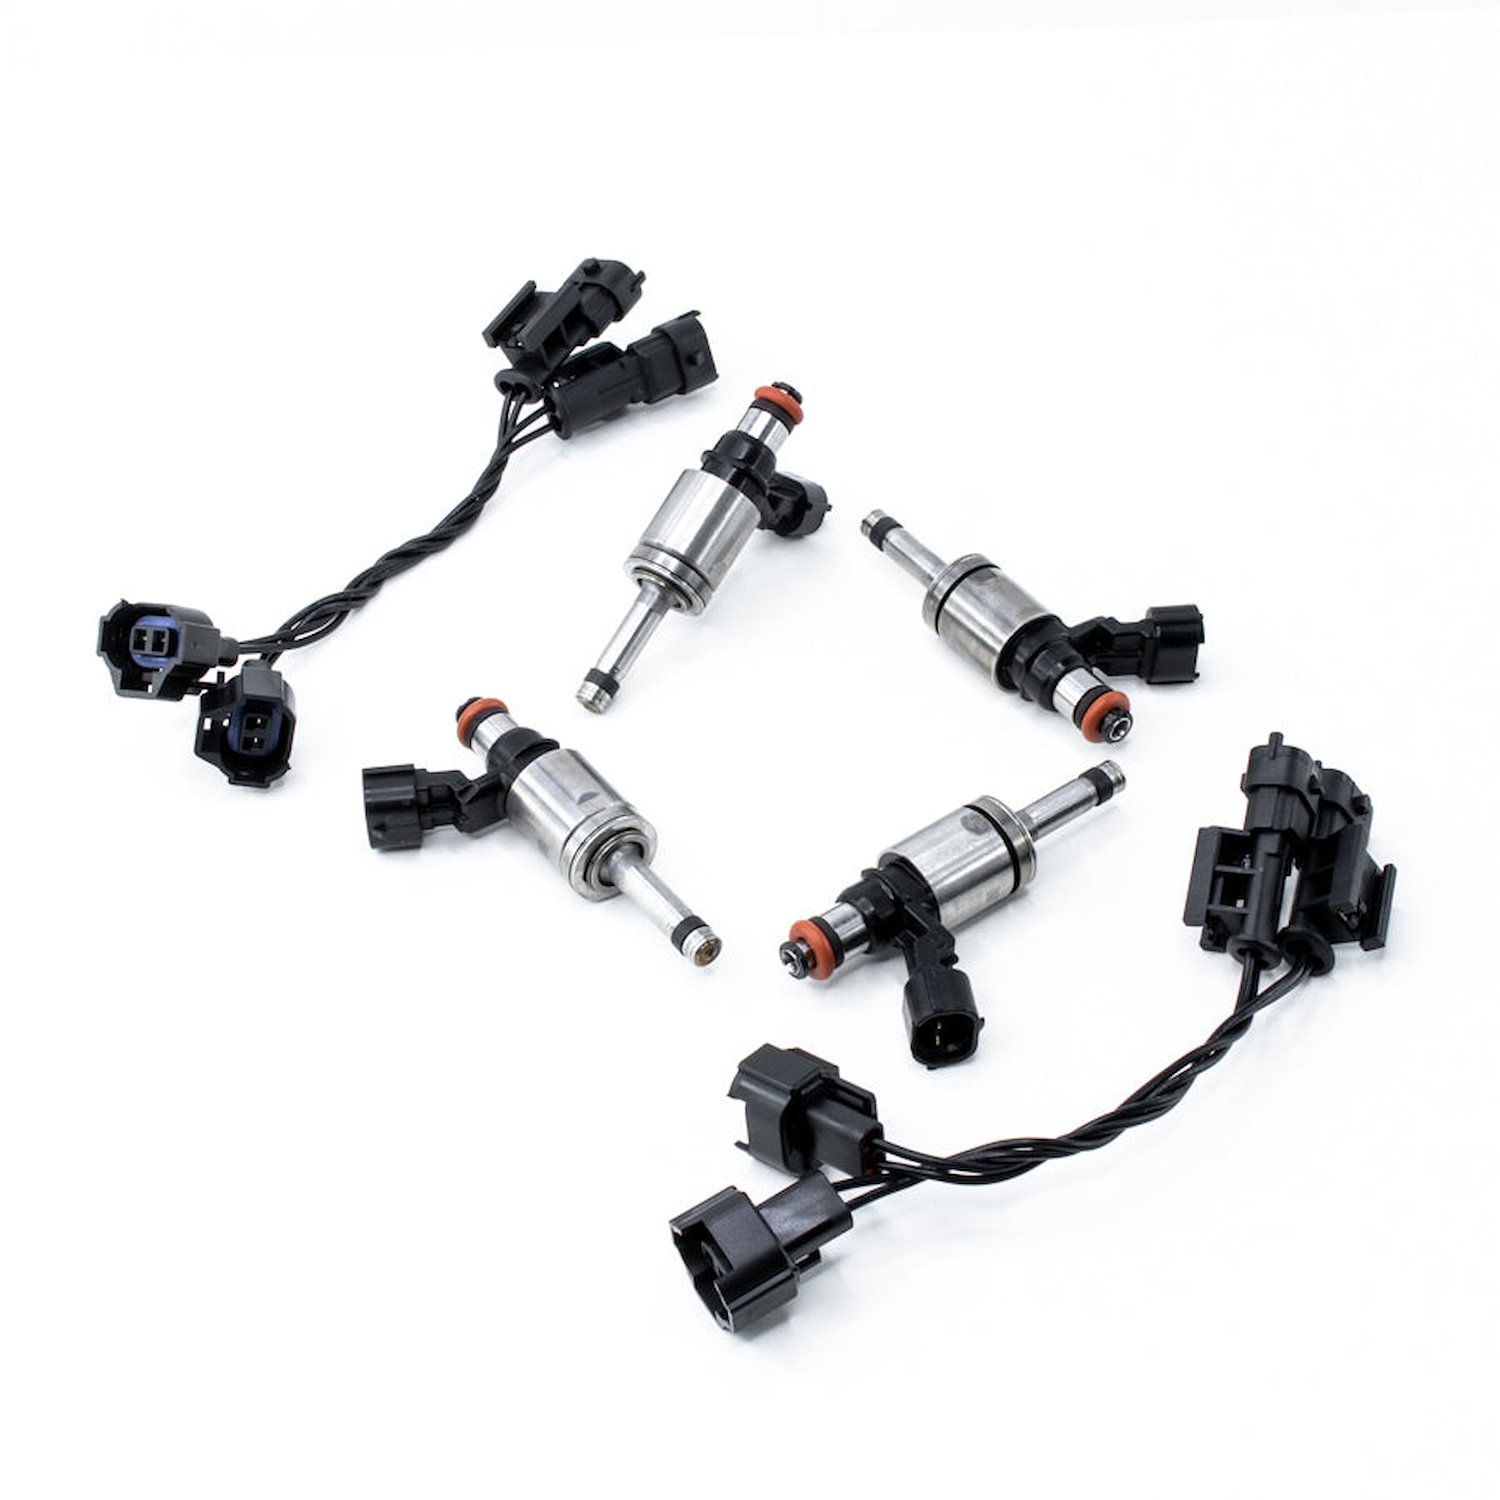 19S0117004  1700cc Injectors (GDI) for 13-18 Ford Focus ST/RS 2.0/2.3 and 15 Mustang 2.3L Ecoboost